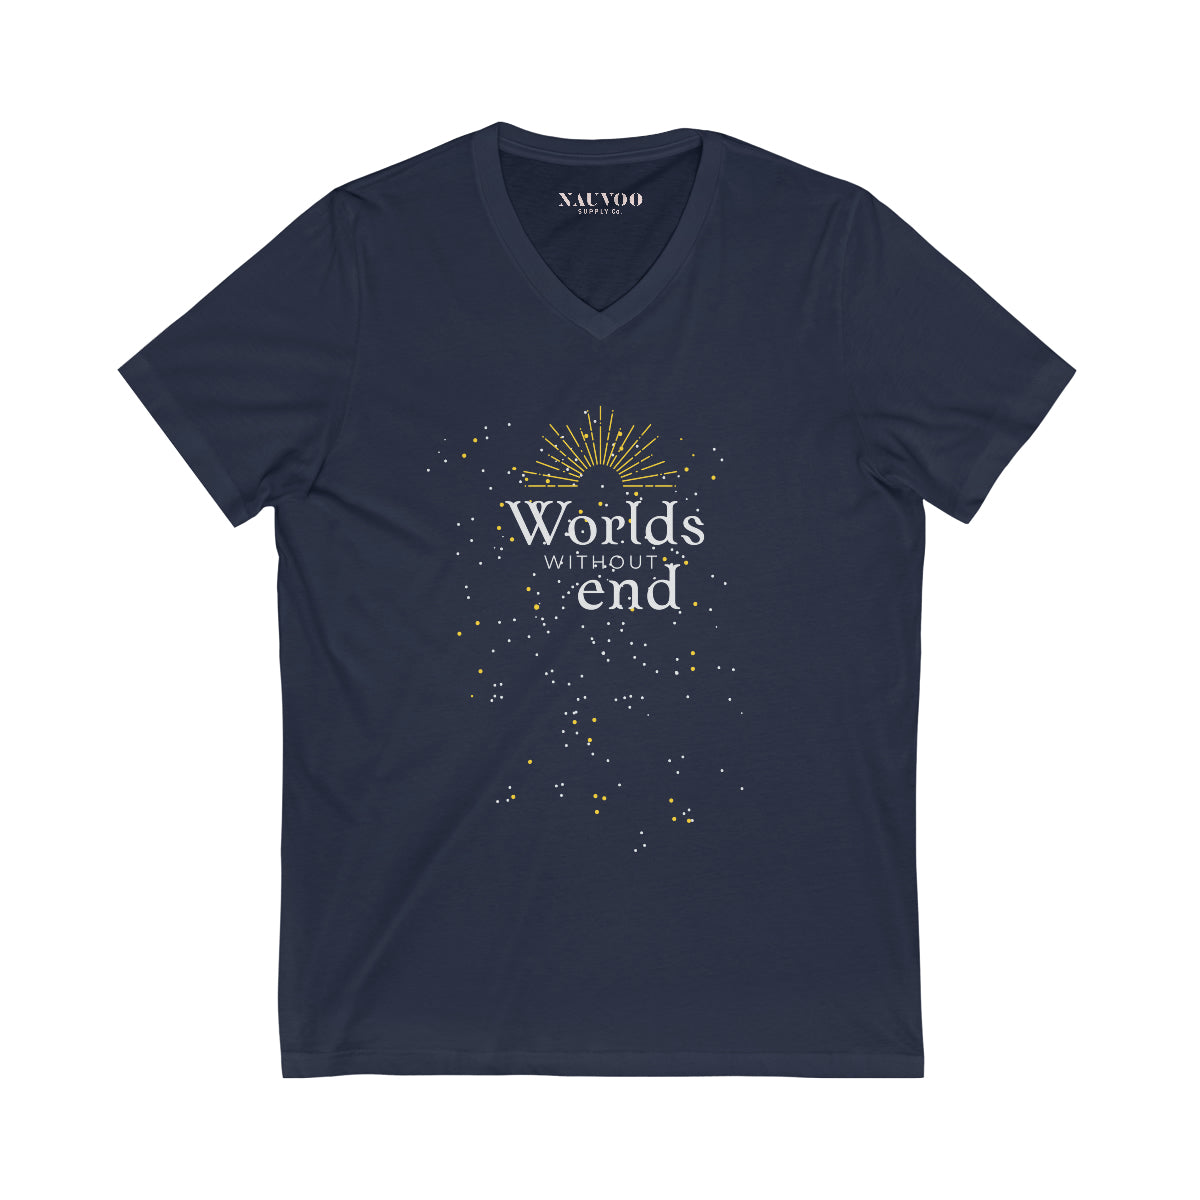 Women’s “World’s Without End” V-Neck